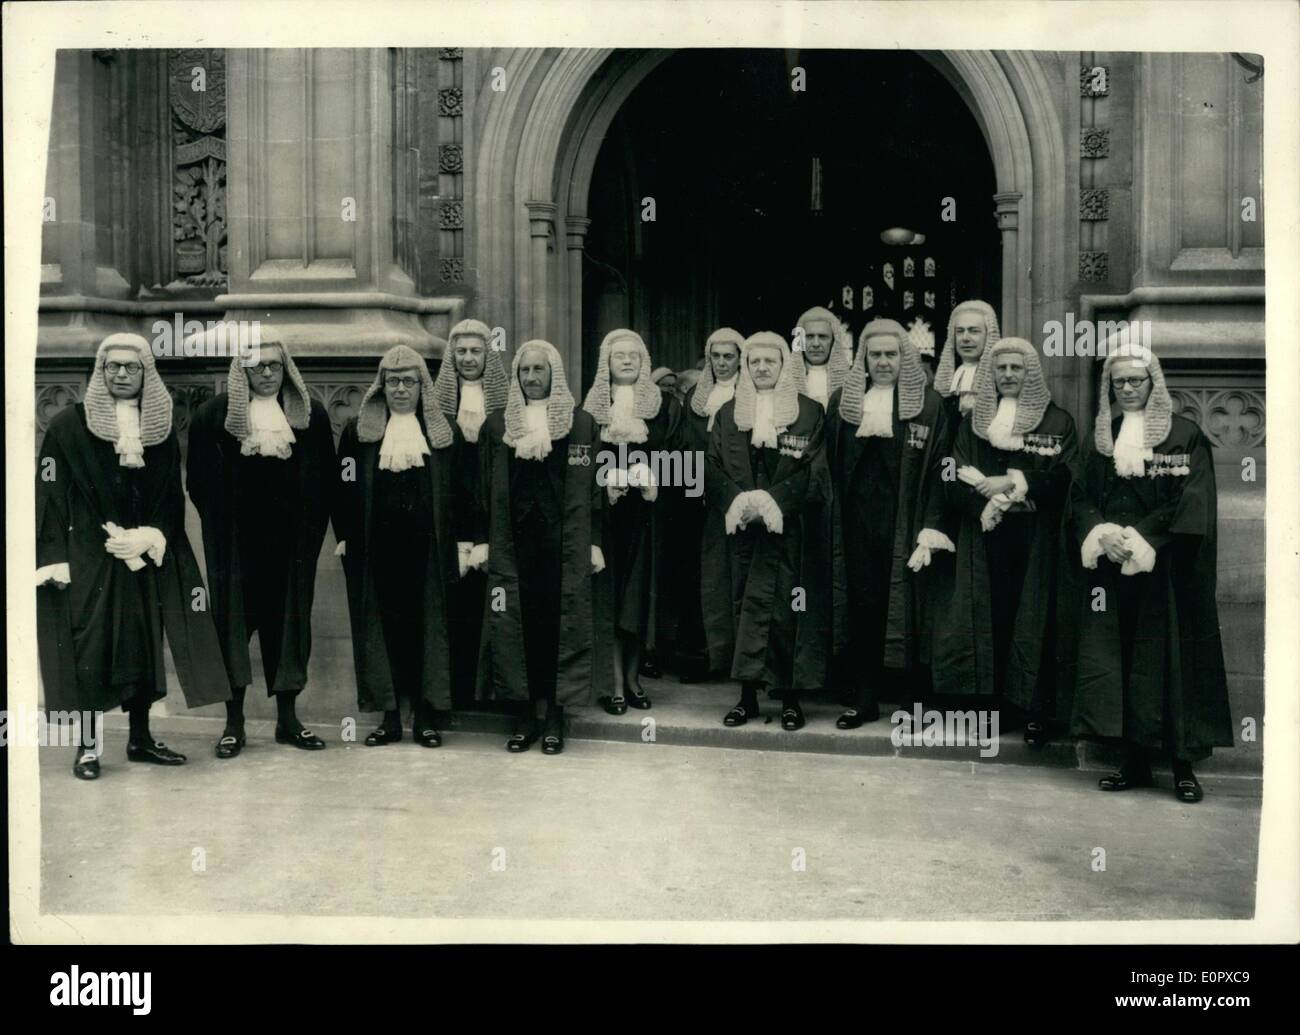 Apr. 04, 1957 - New Q.C.'s Sworn In At House Of Lords: 47-year old Miss Dorothy Knight Dix was among the newly appointed Queen's Counsels, who were sworn in today at the House of Lords. She was called to the Bar in 1934 and in 1946 was sworn in as the first woman barrister to sit as Recorder. Keystone Photo Shows:- New Q.C.'s seen leaving the House of Lords after today's Swearing in. Stock Photo